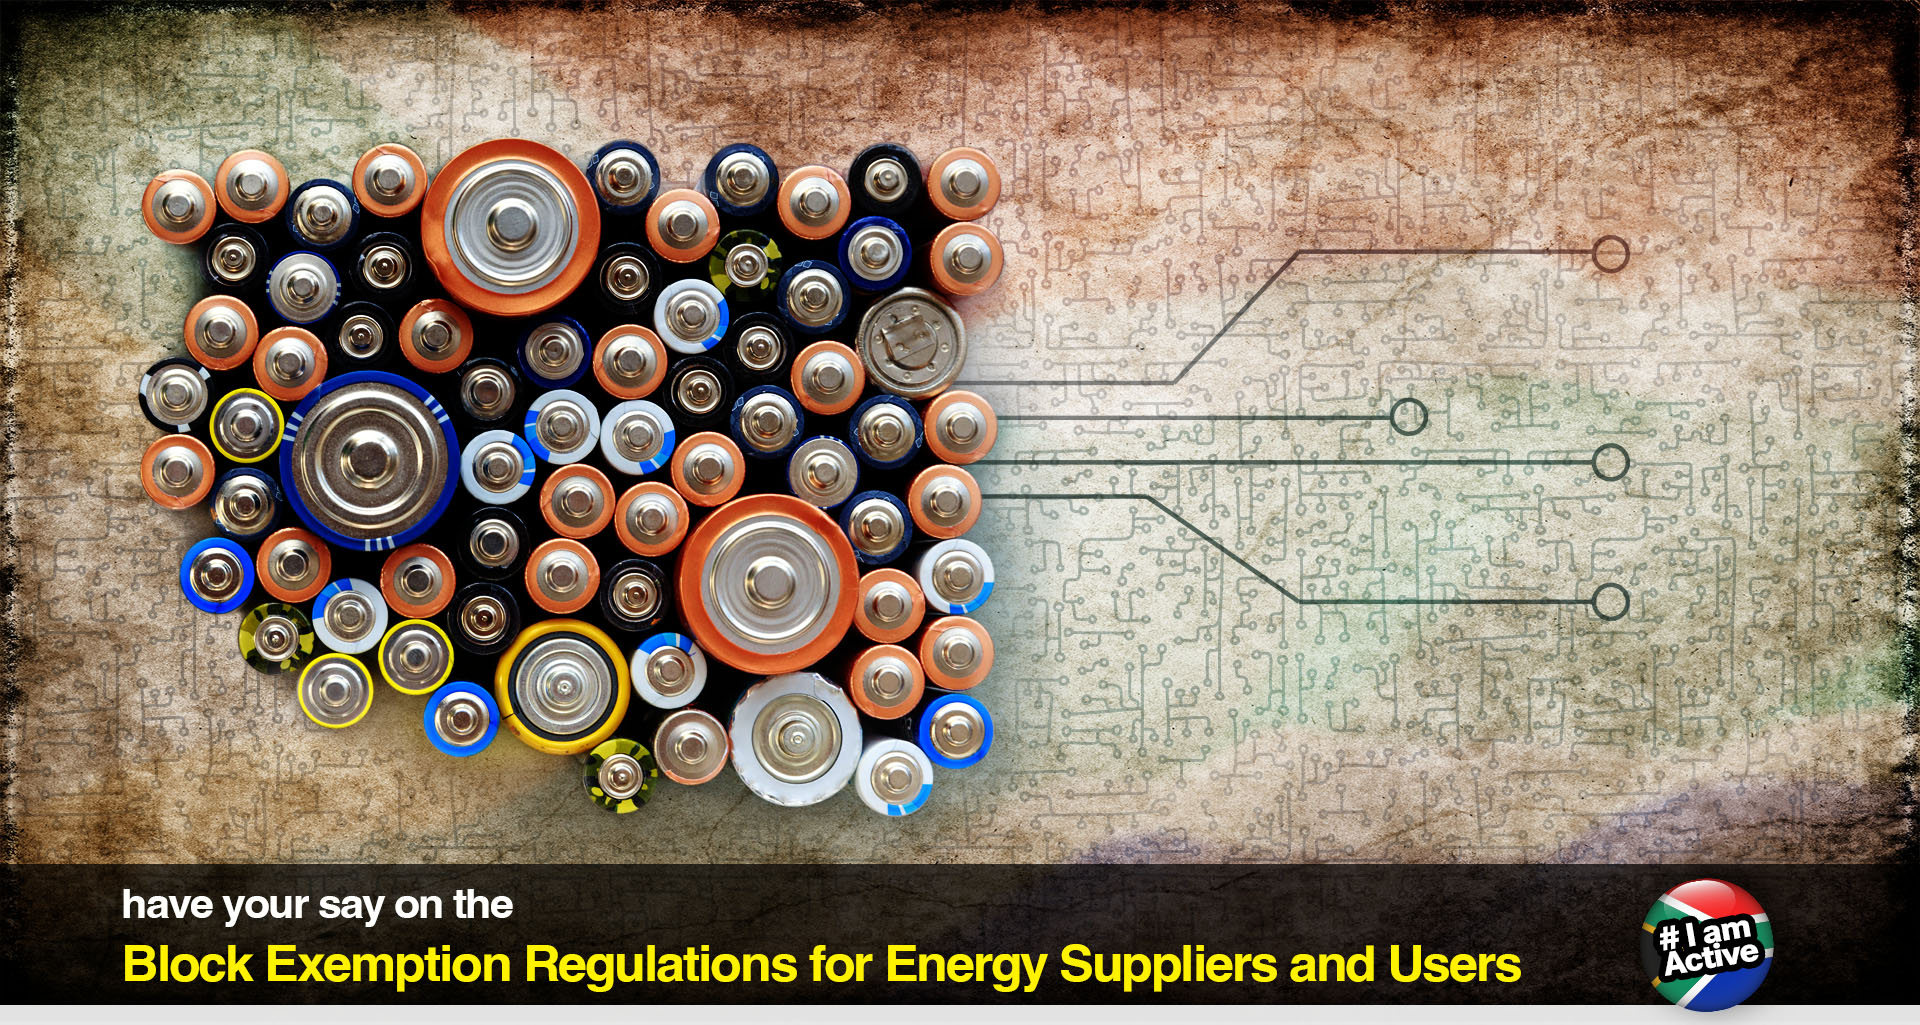 Exemption regulations for energy users and suppliers